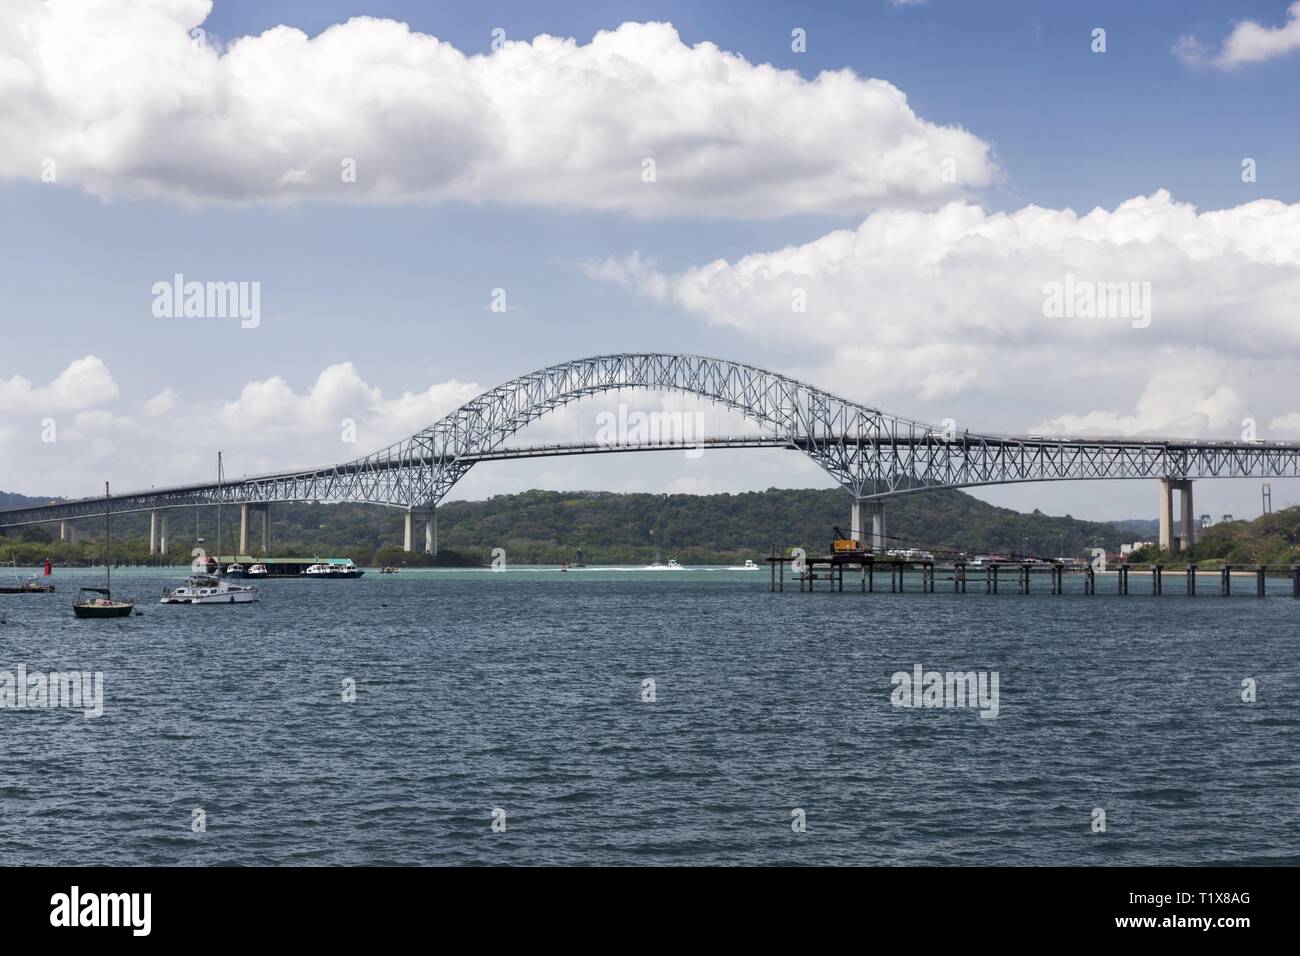 The Bridge of the Americas, a Famous International Landmark Road Bridge in Panama which spans the Pacific Entrance to the Panama Canal Stock Photo